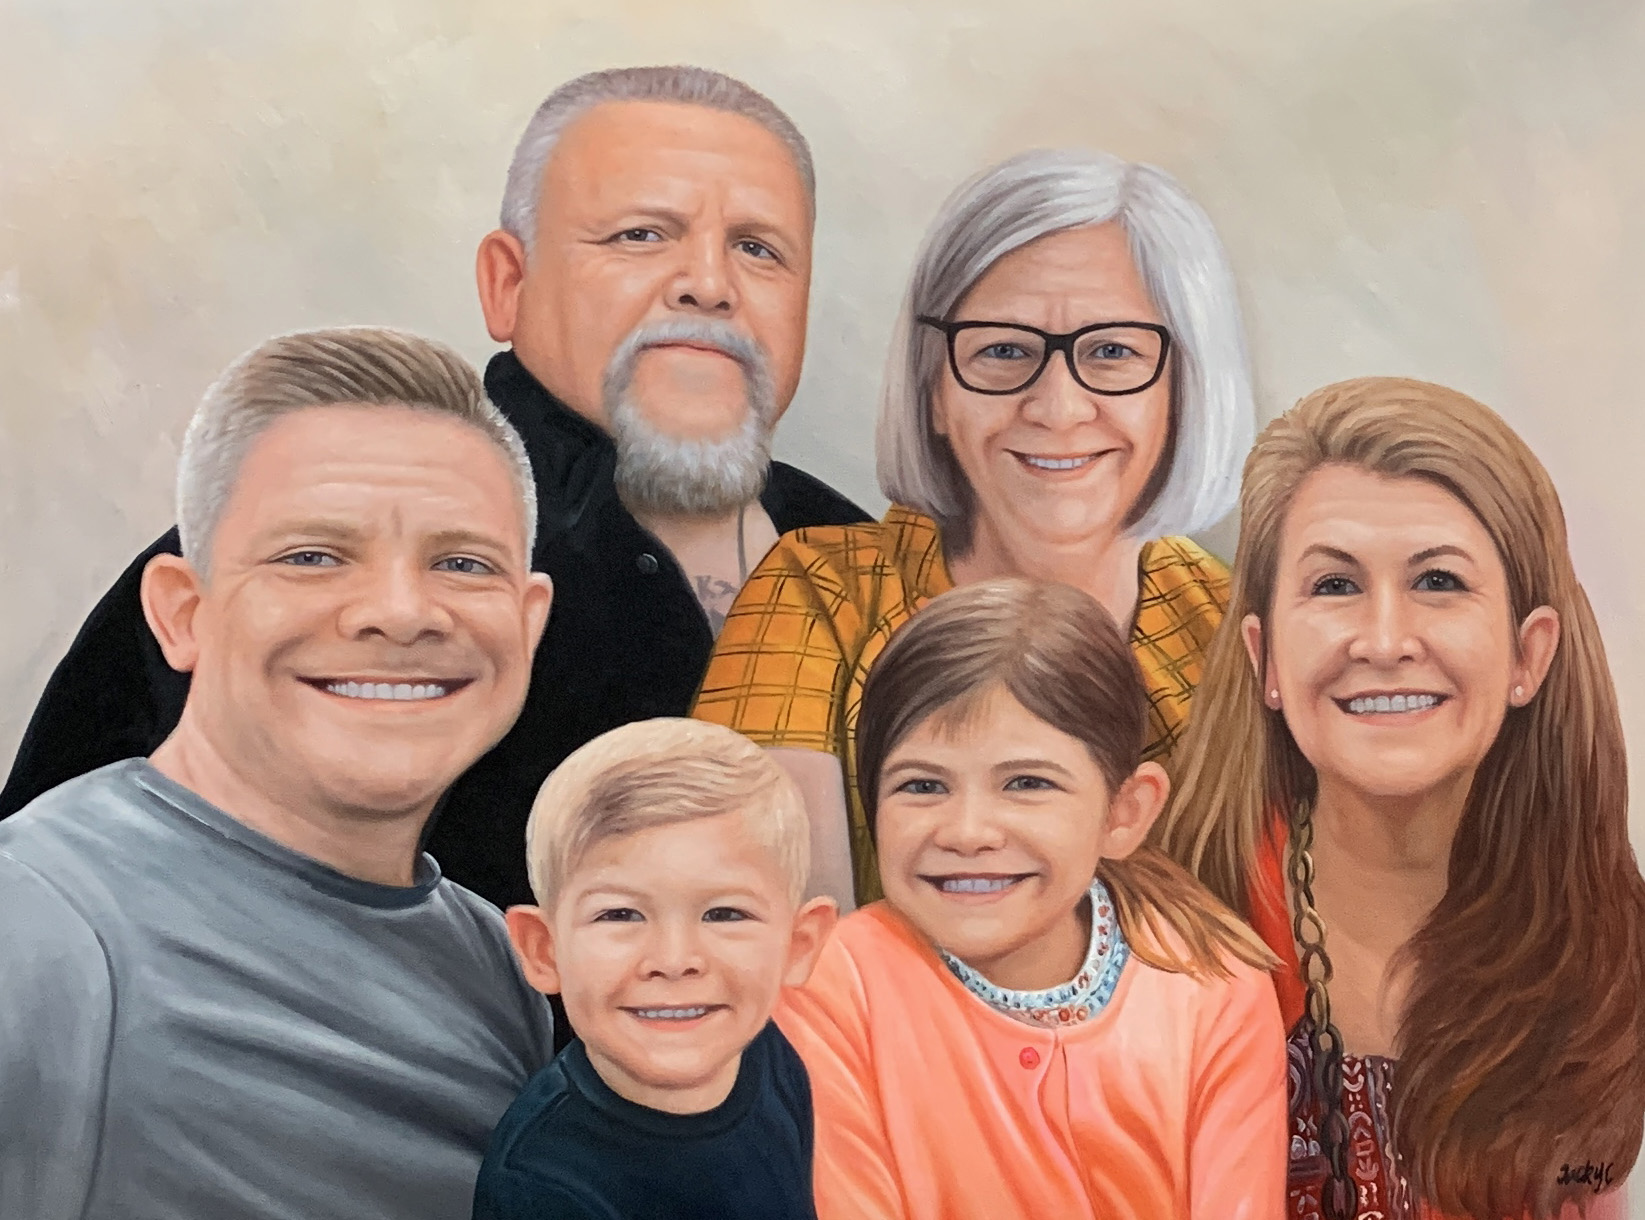 A compilation family portrait shows your deepest sympathy for their loss.